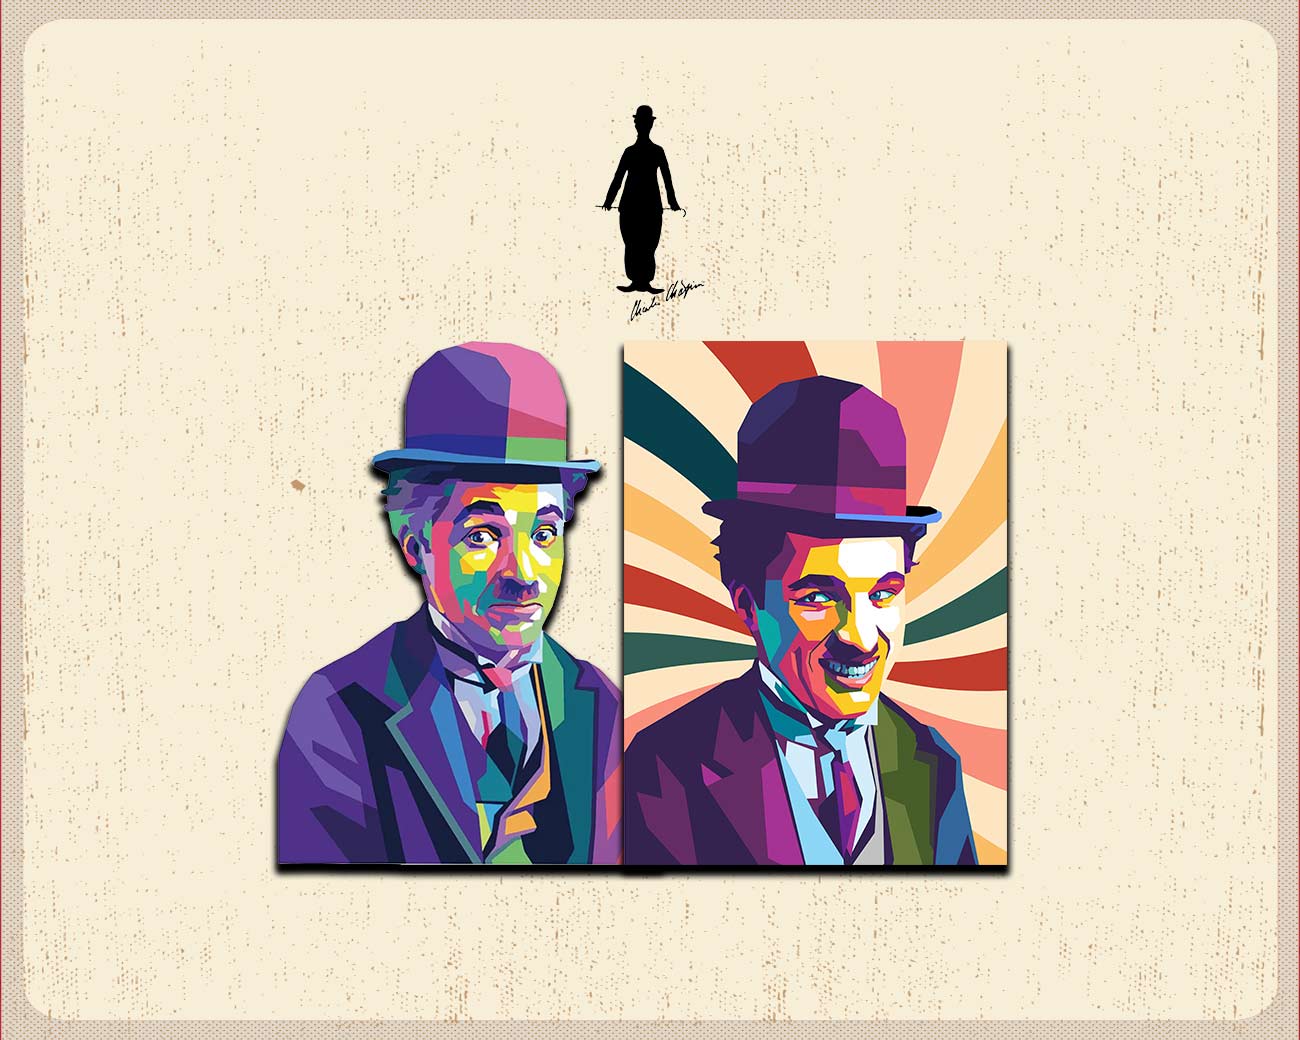 Charlie Chaplin Wooden Jigsaw Puzzles - Officially Licensed